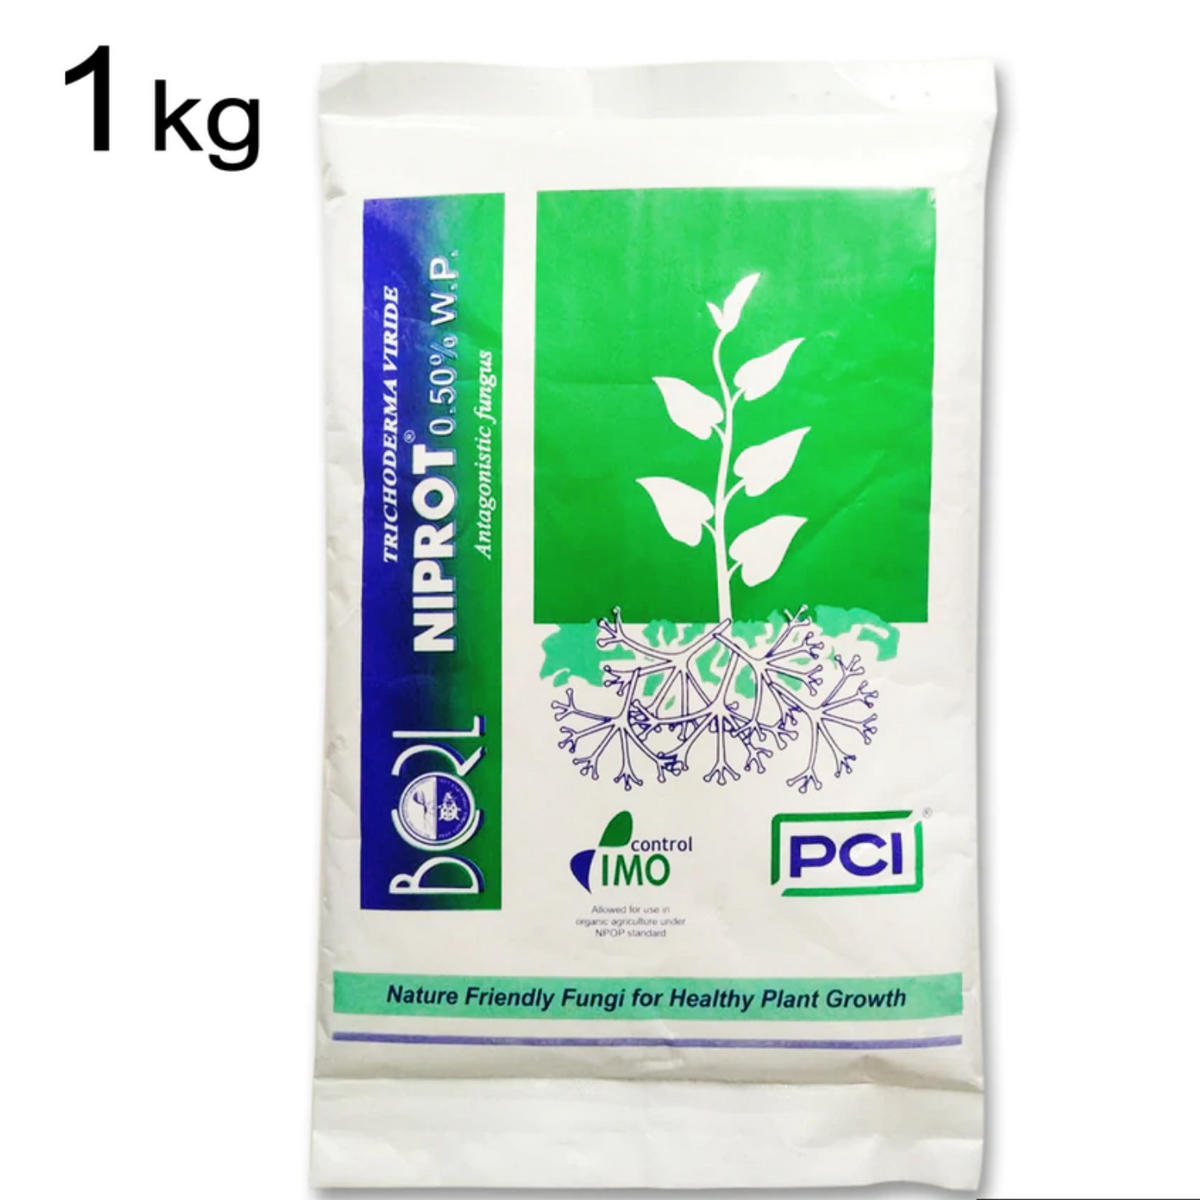 ORGANIC BIO FUNGICIDE FOR SEEDS AND YOUNG PLANTS (1 KG)